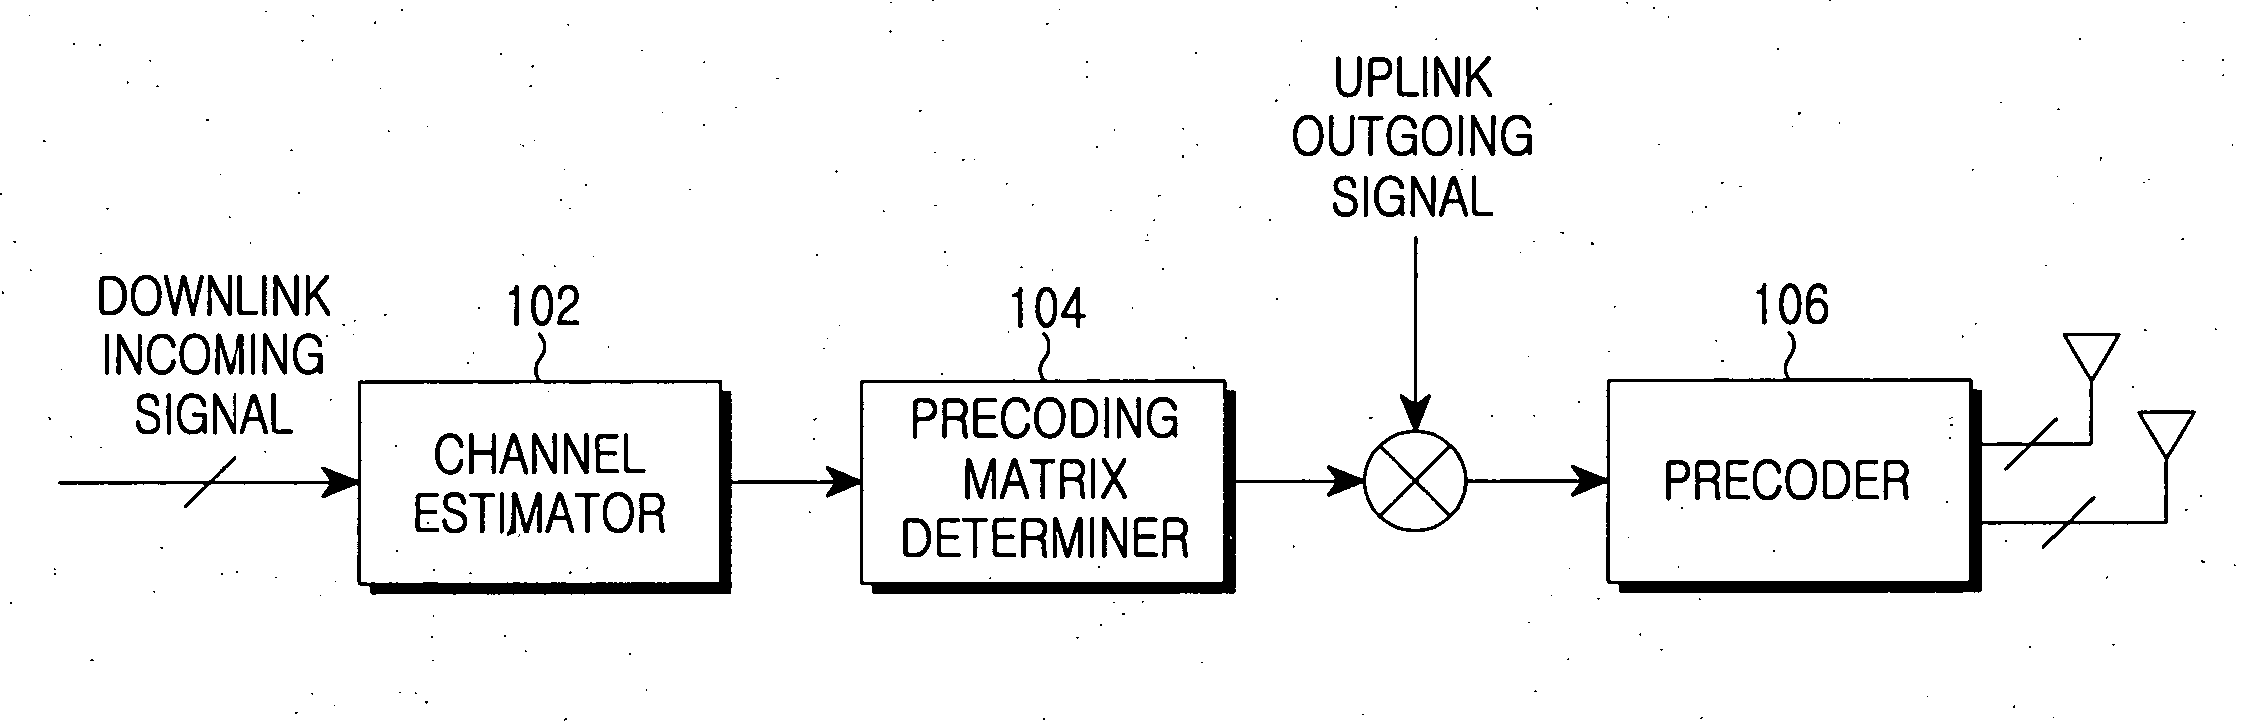 Apparatus and method for transmitting an uplink signal in a mobile communication system using an OFDMA scheme